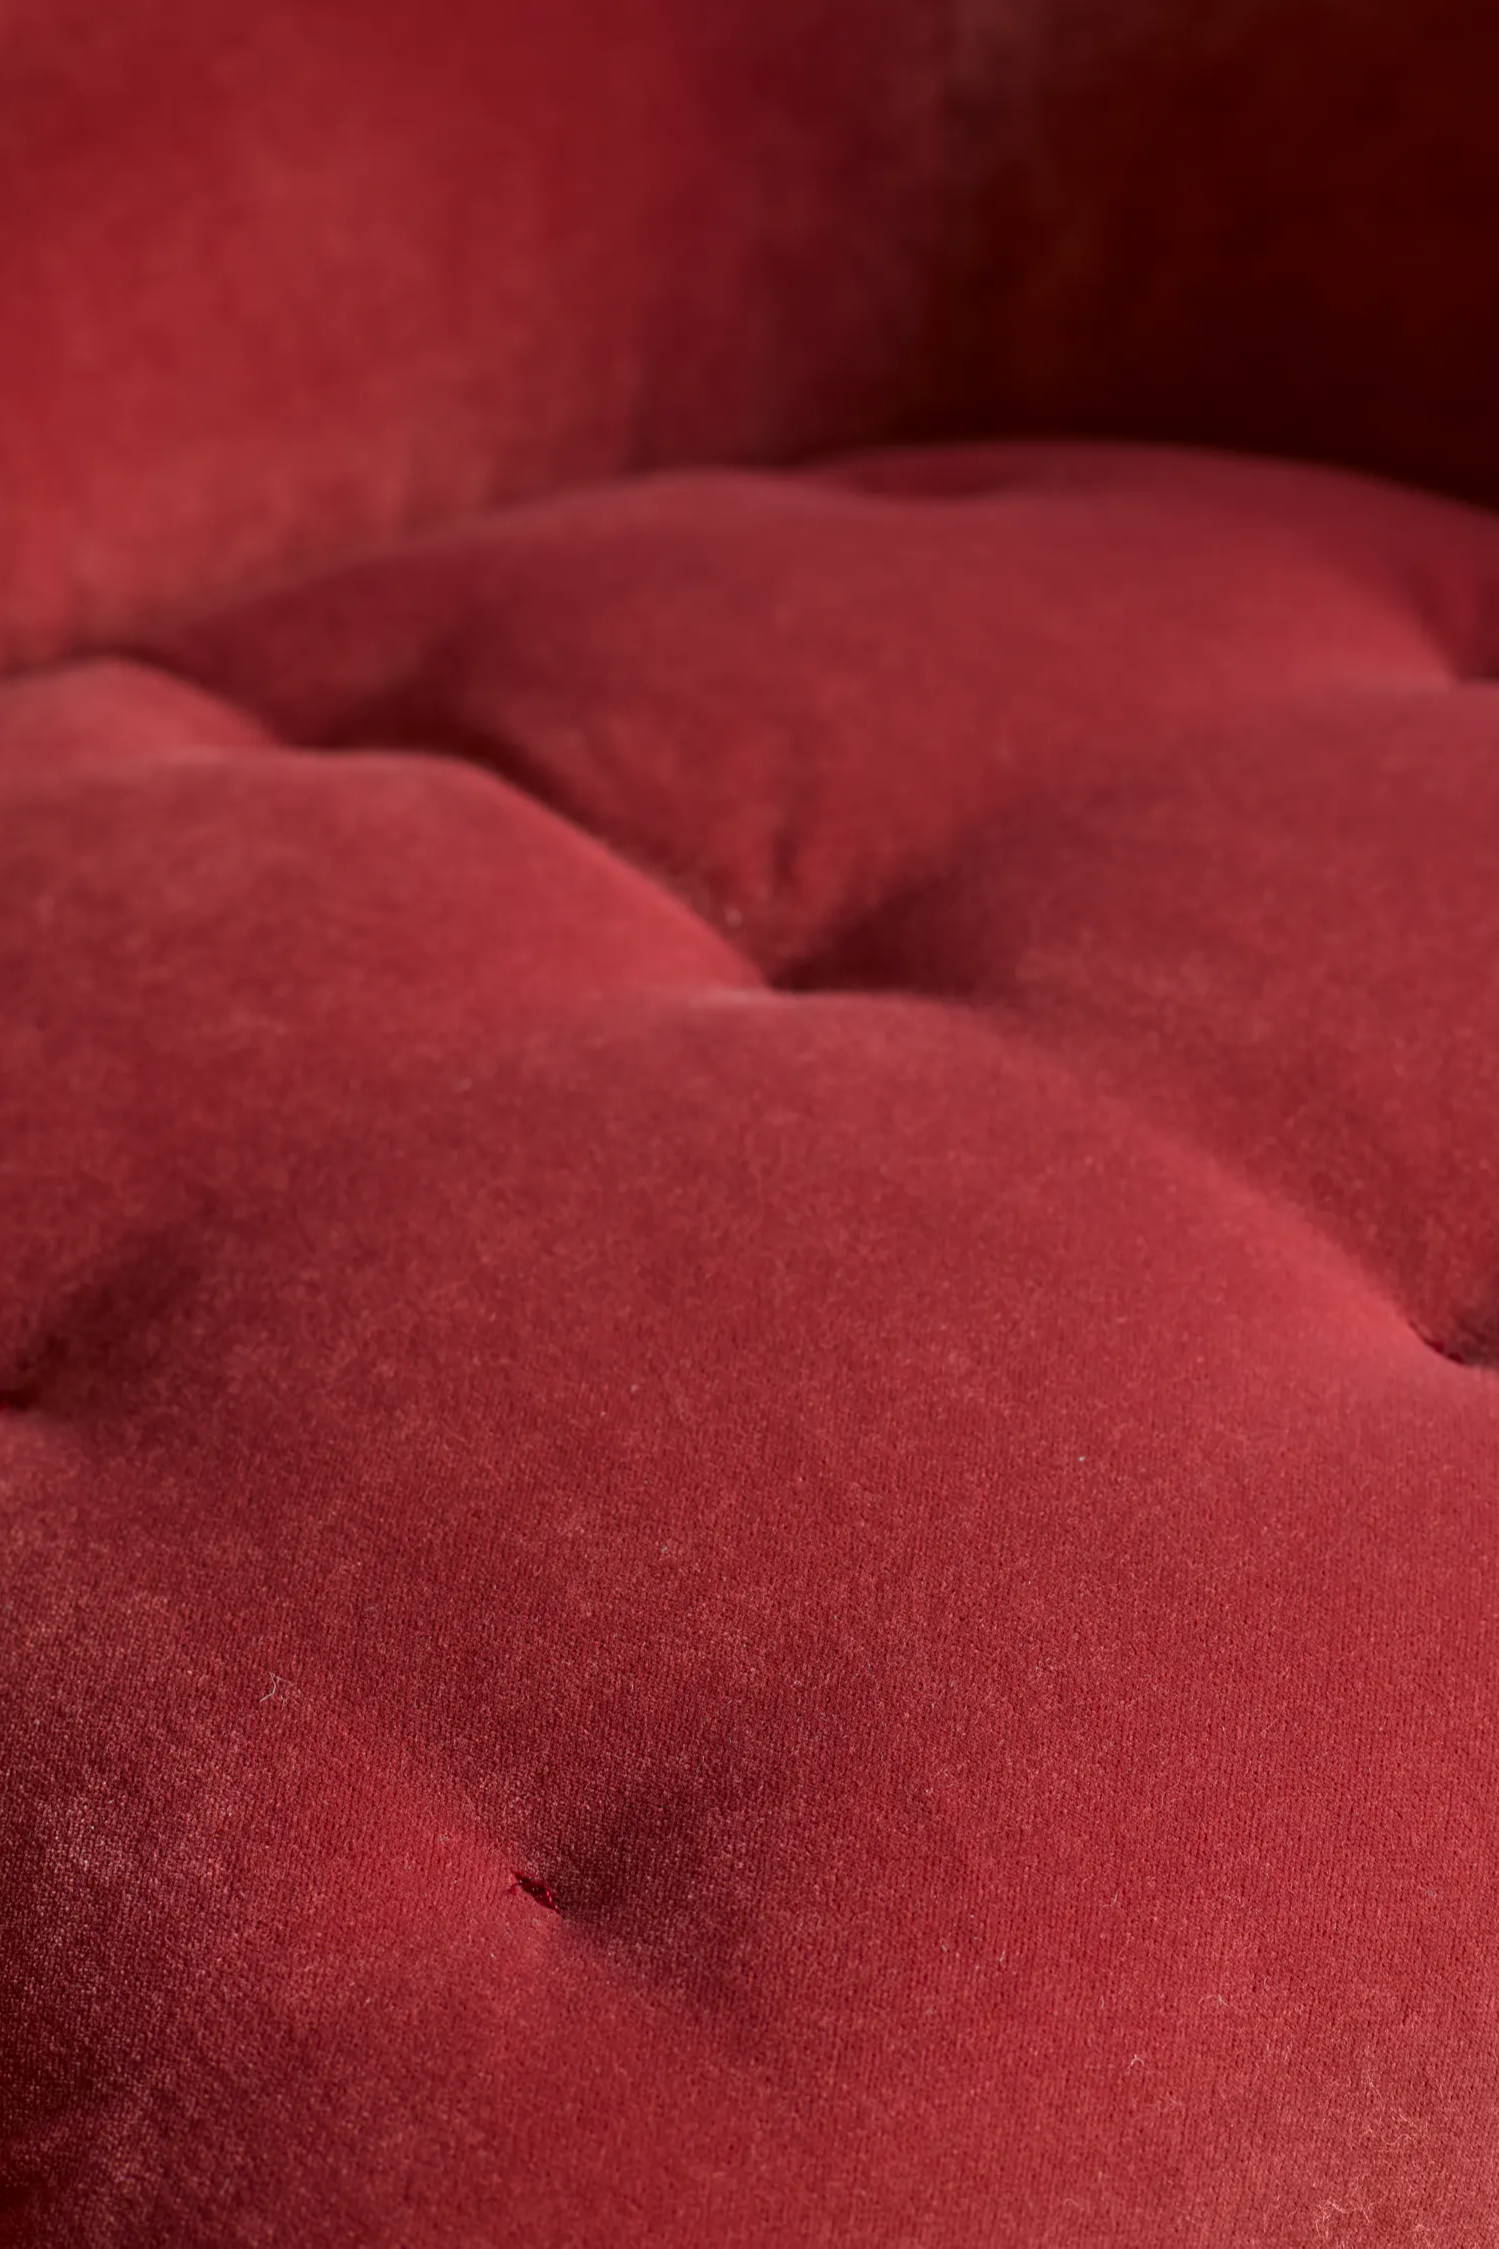 Close up of pink blind button armchair seat.